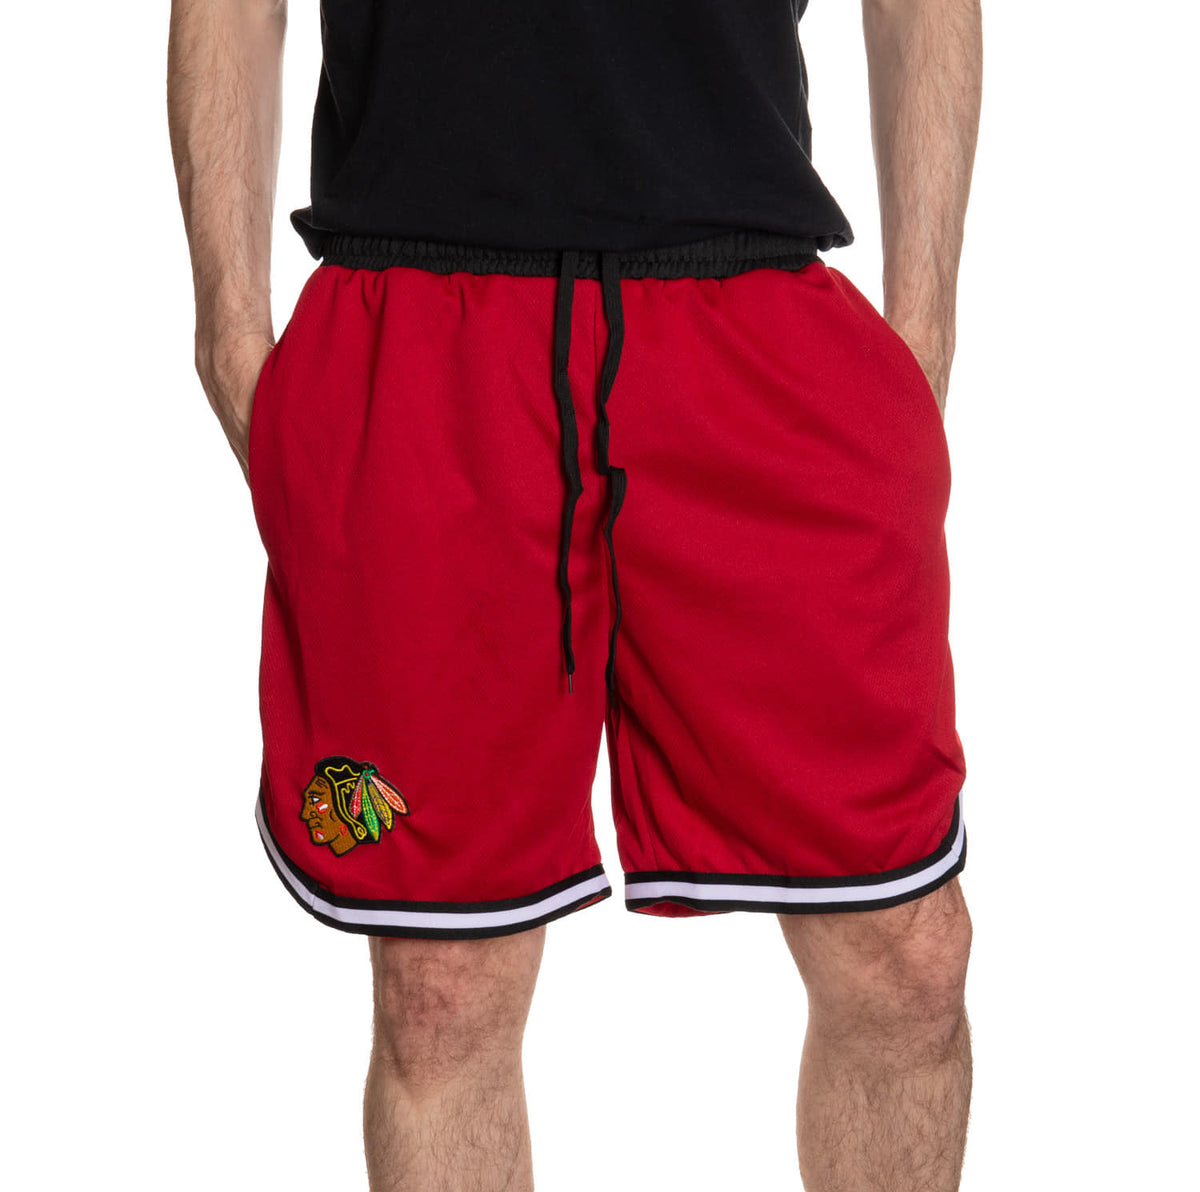 Chicago Blackhawks Men's 2 Tone Air Mesh Shorts Lined with Pockets